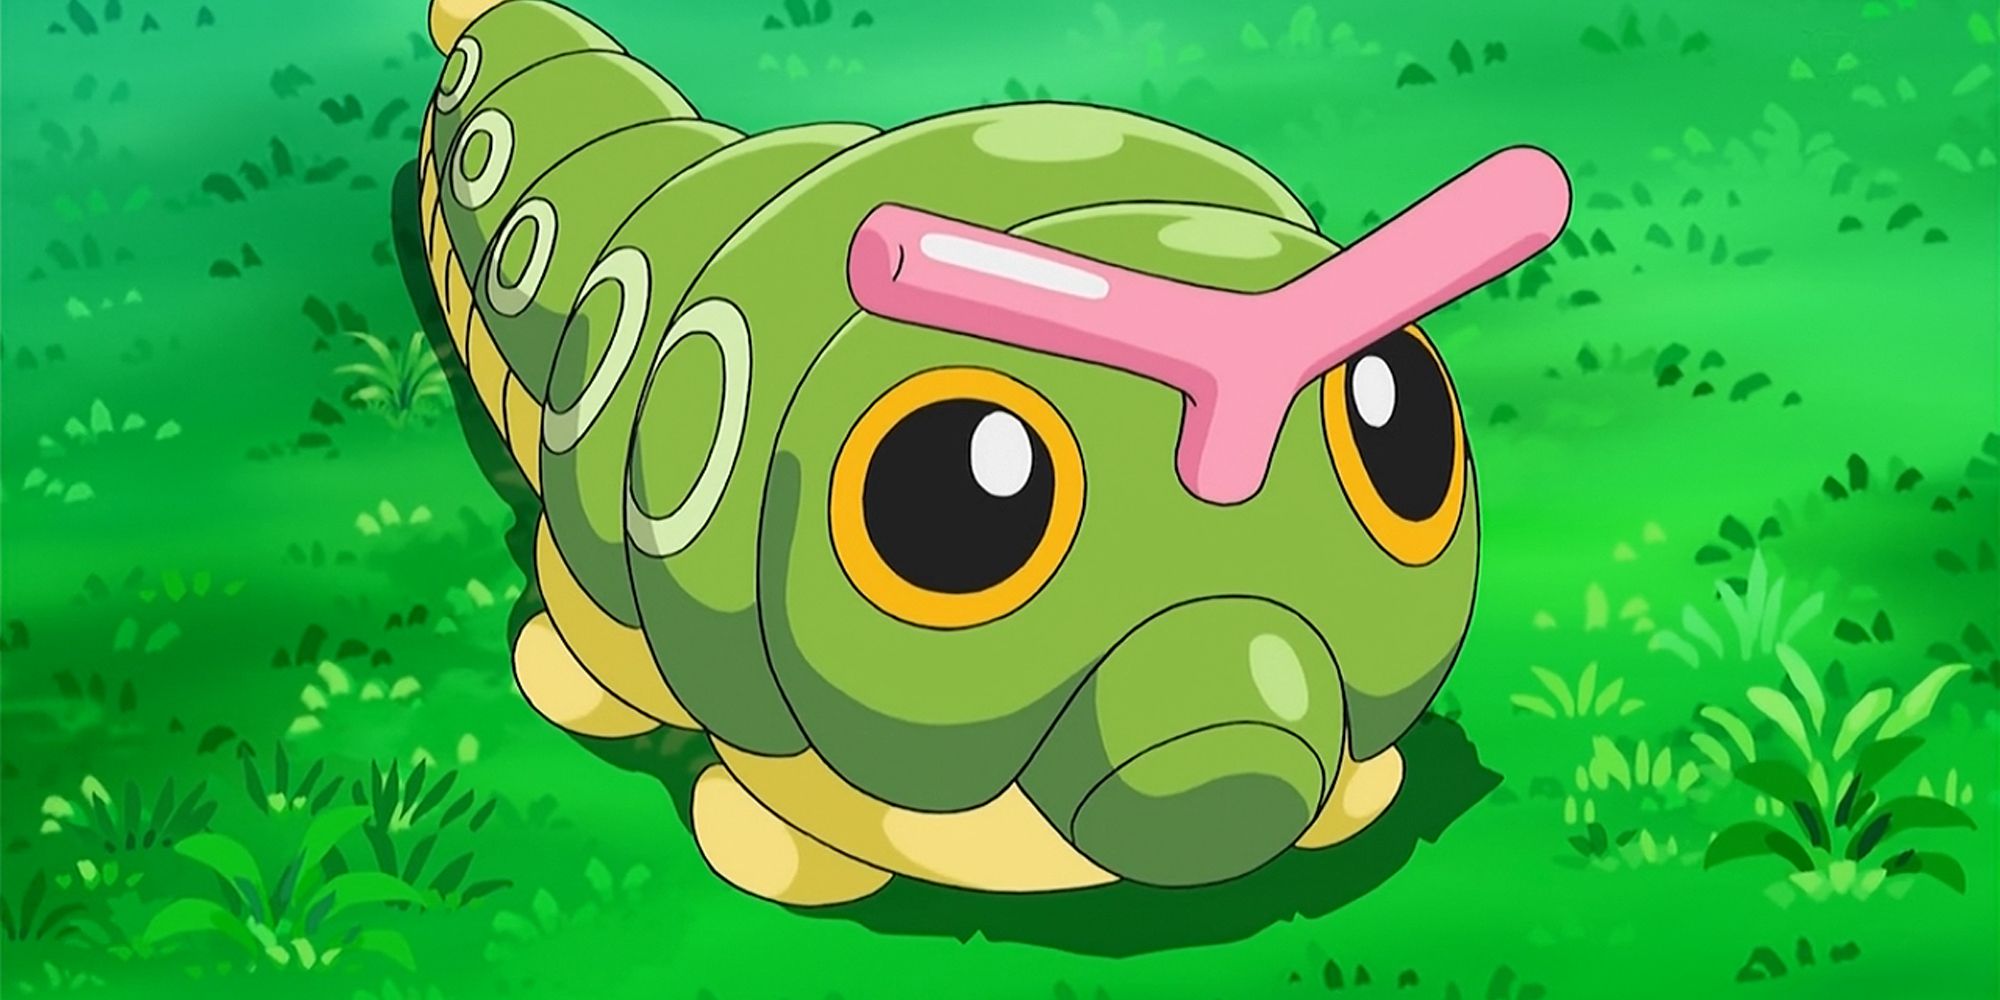 Caterpie from Pokemon anime standing on the grass.